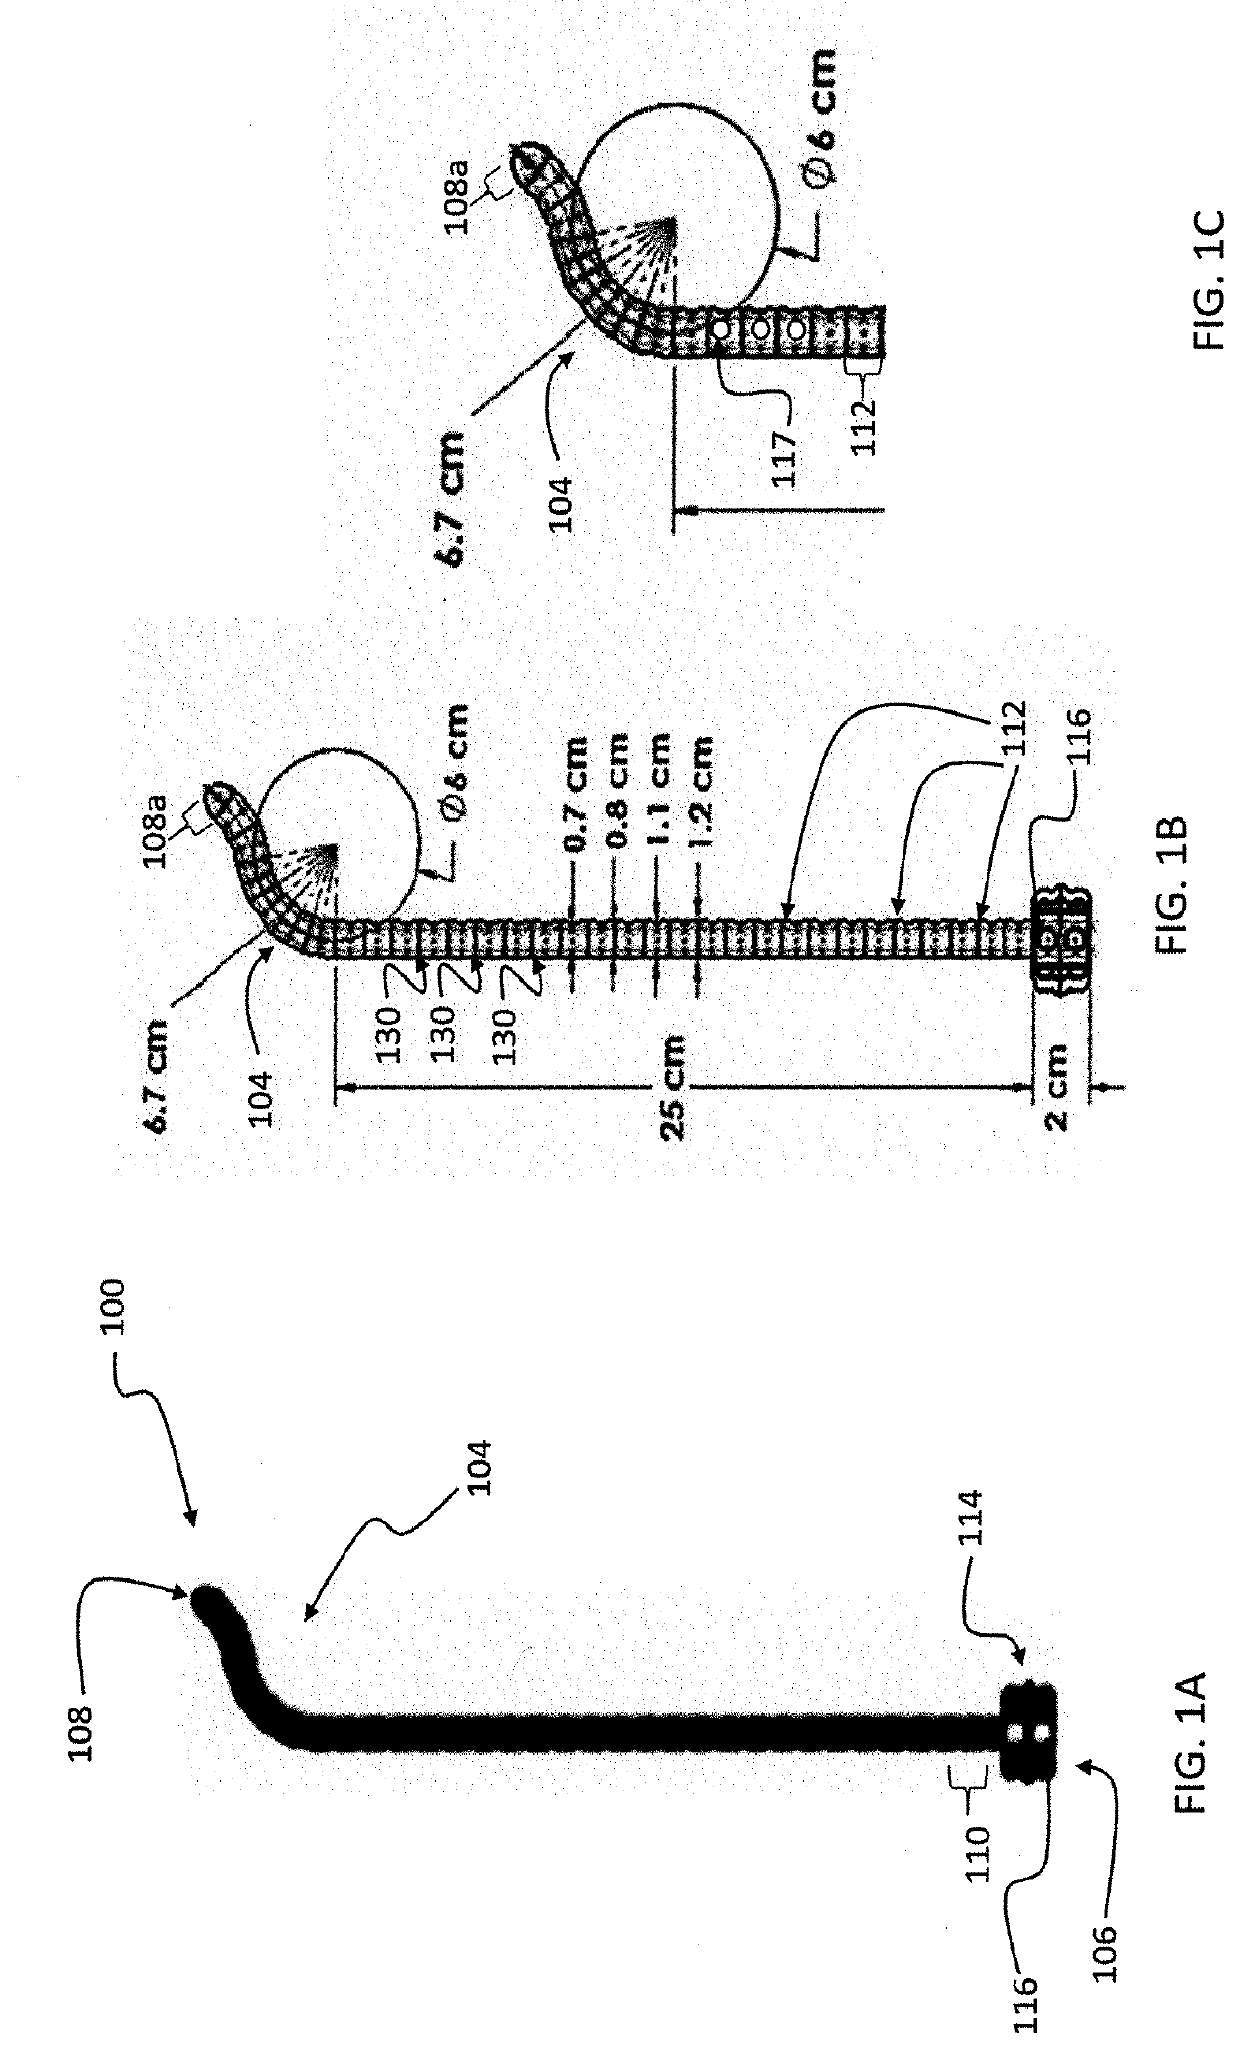 Esophageal deflection device